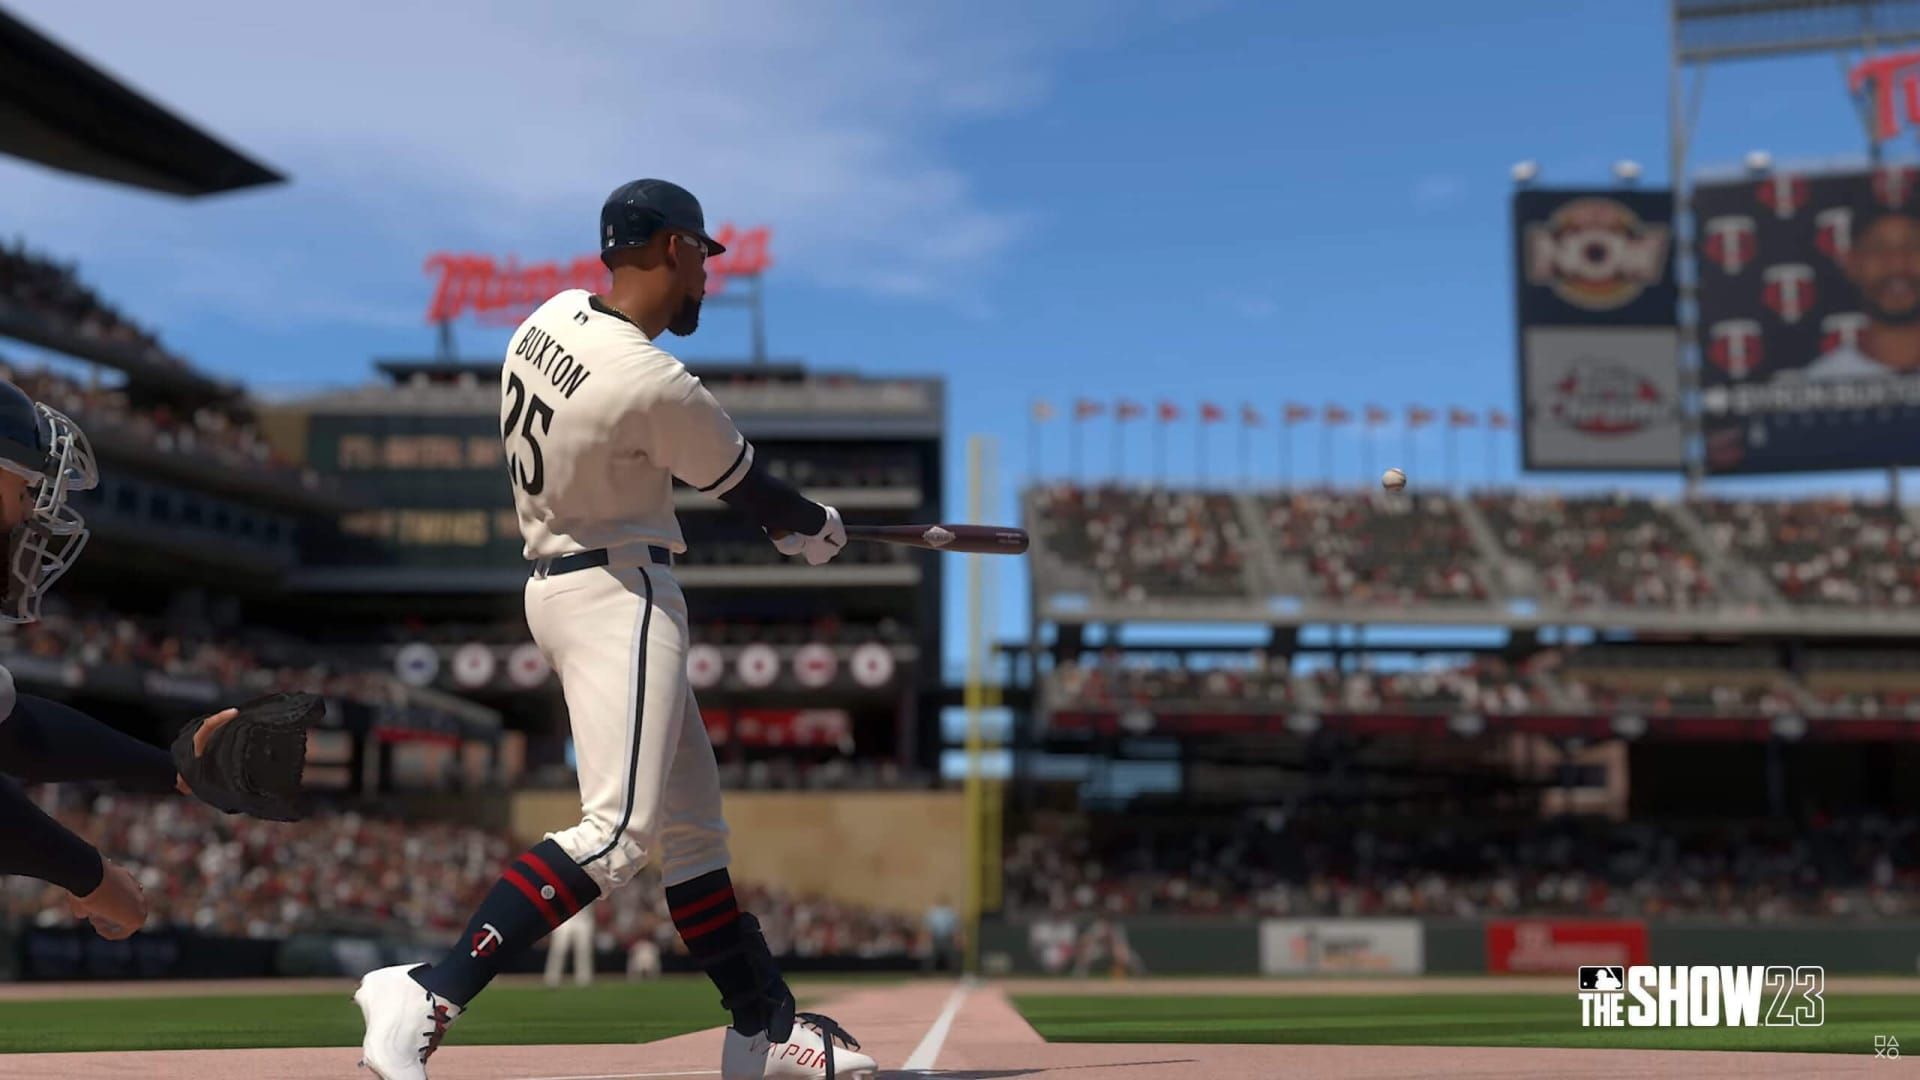 preorder: MLB The Show 23 preorder benefits content, available editions, and more